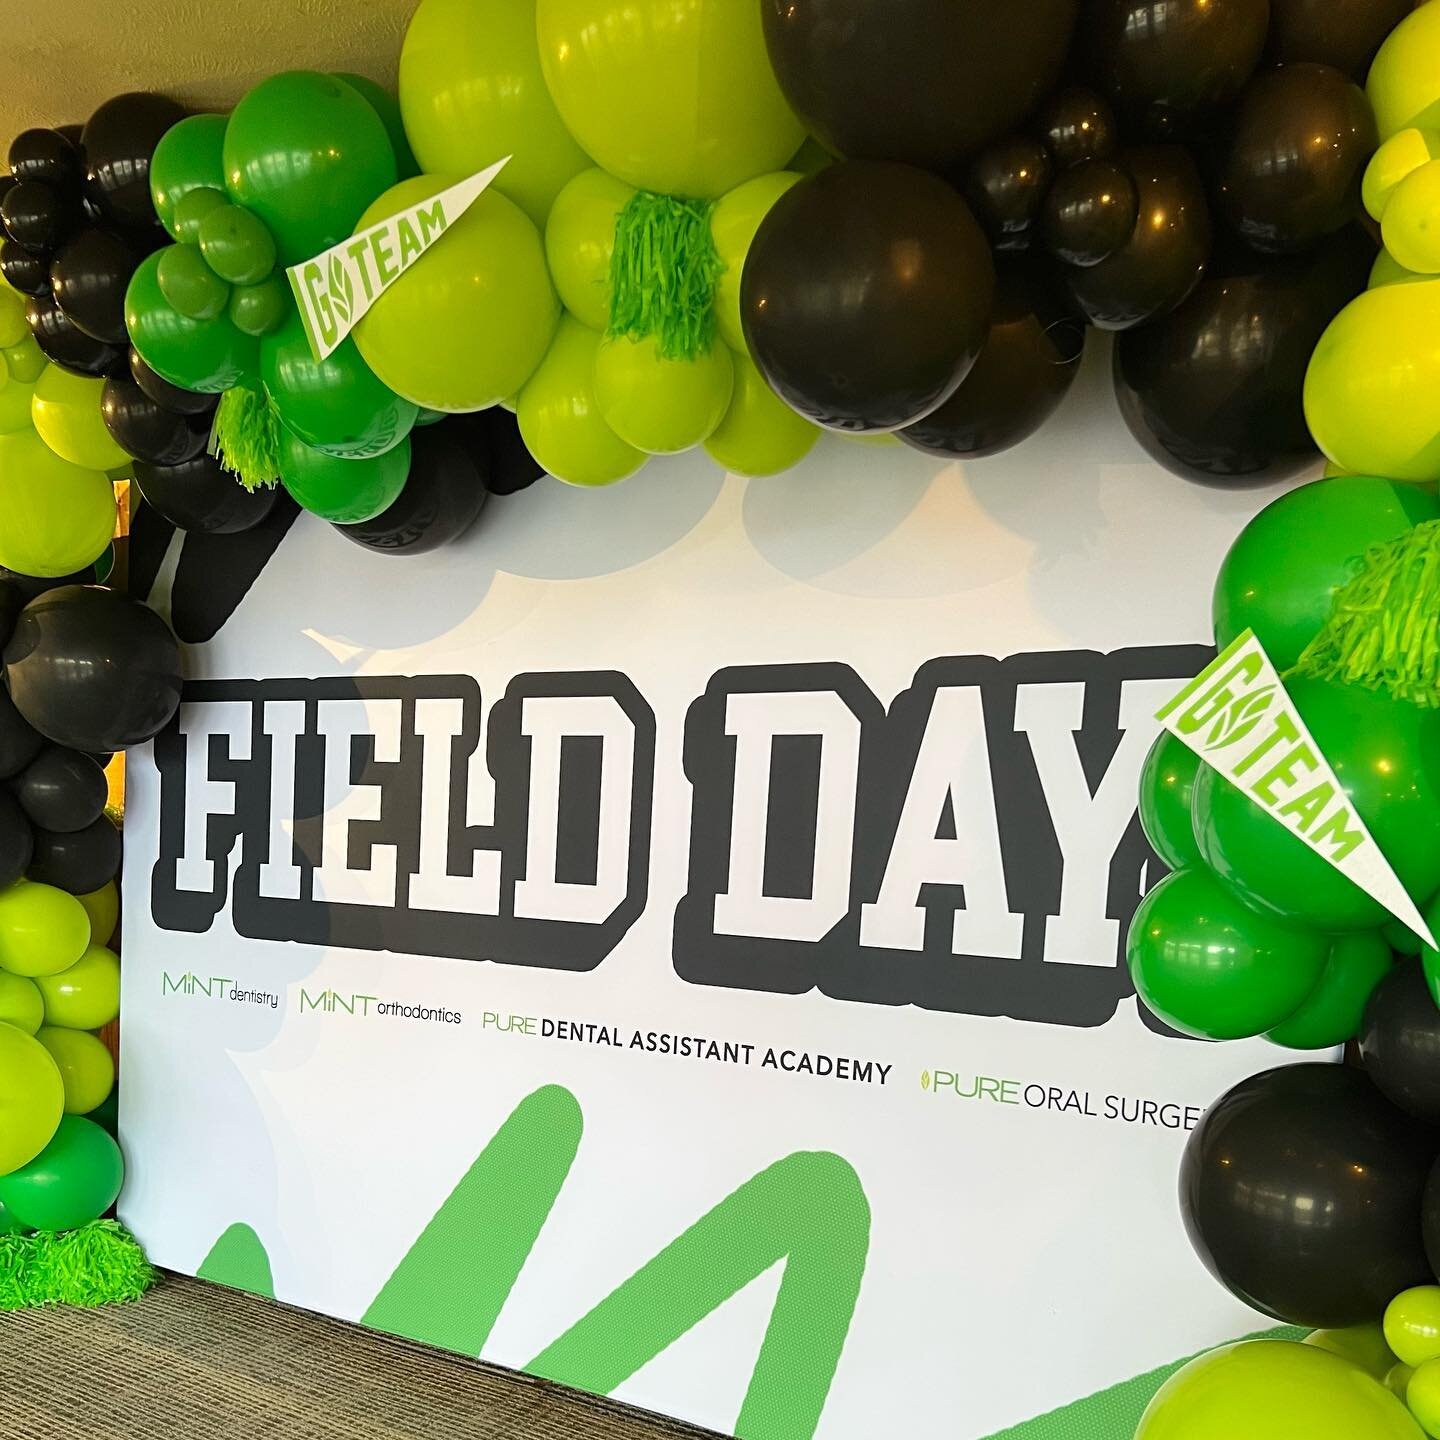 MINT&rsquo;s Field Day was full of food, fun, giveaways and team bonding activities. 💚
.
.
.
.
.
.
.
.
.
MINT&rsquo;S Field Day- Company Wide Picnic 
10.29.22 - Arlington, TX